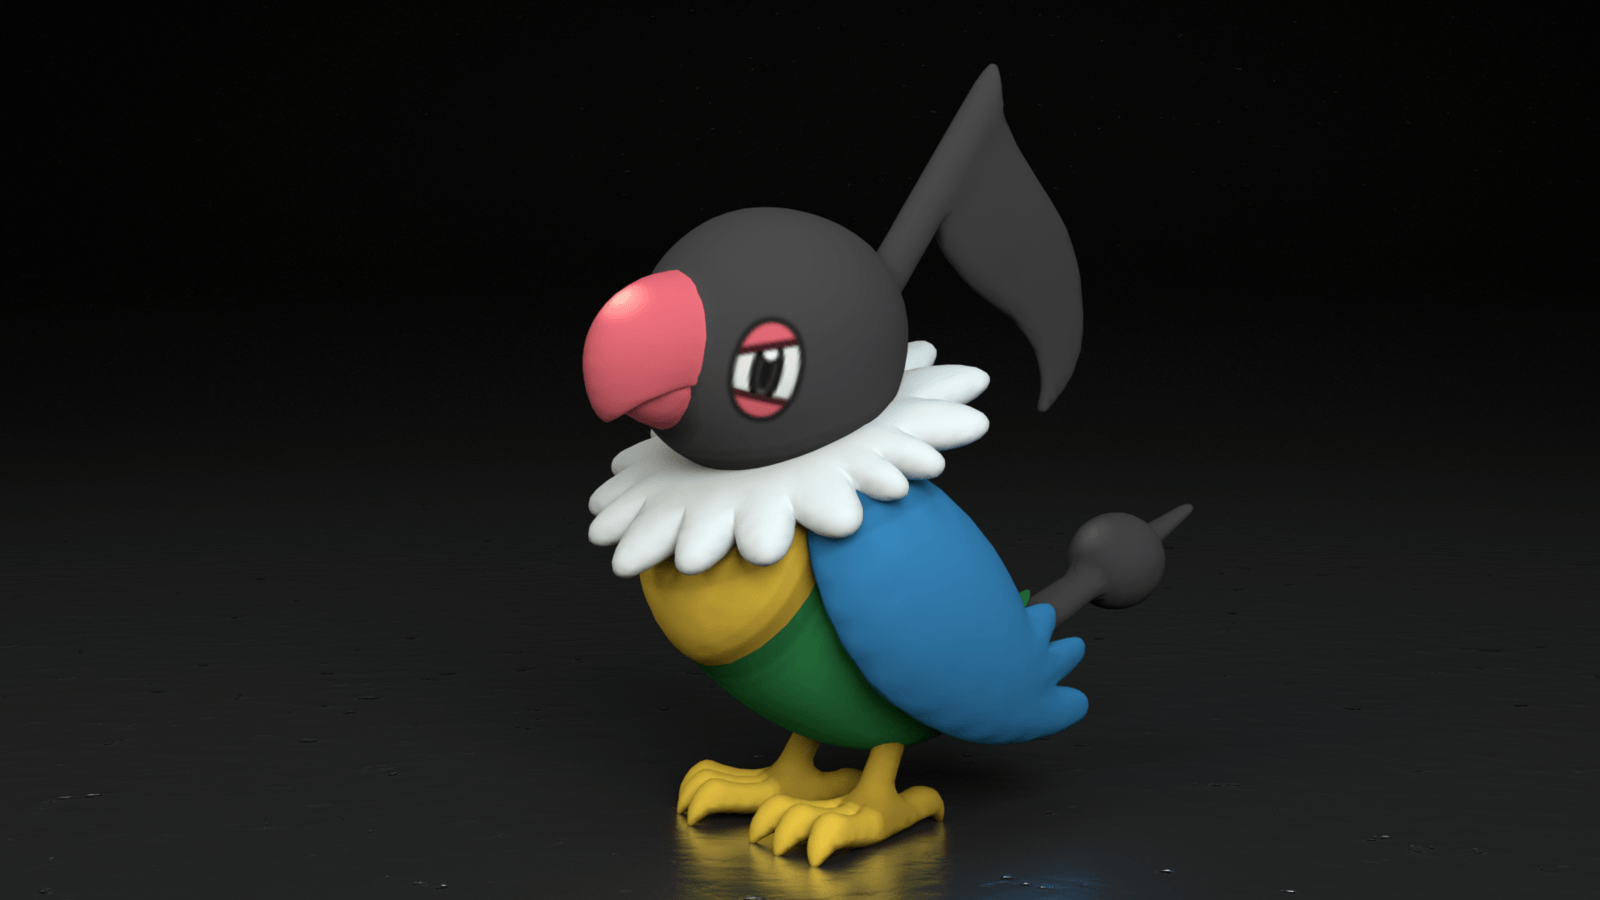 Chatot Hd Wallpapers